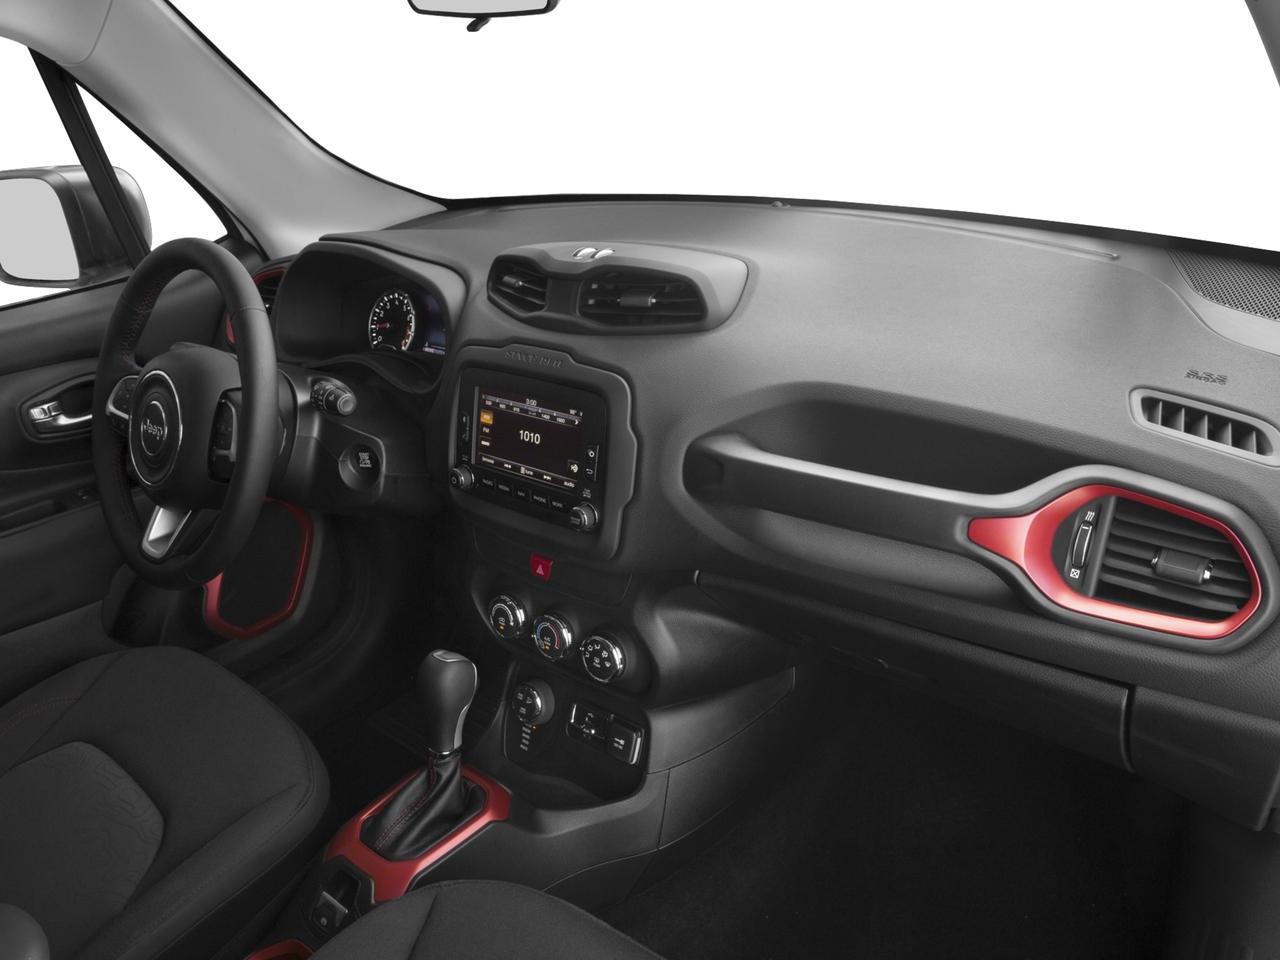 2016 Jeep Renegade Vehicle Photo in Ft. Myers, FL 33907